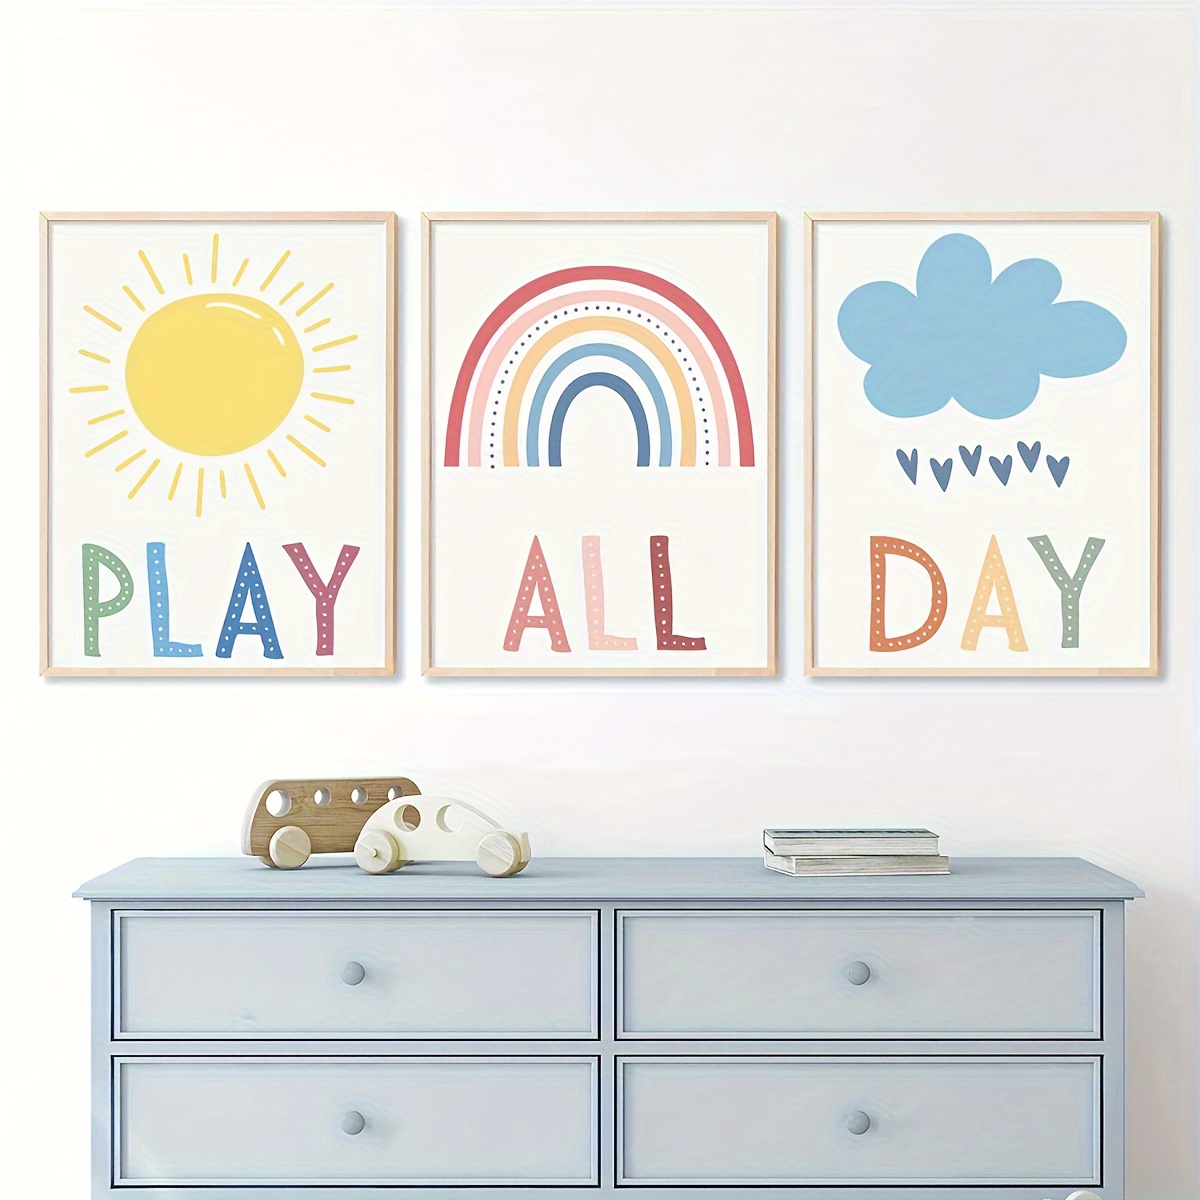 

3pcs/set Framed Canvas Poster Set Vibrant Cartoon Art Whimsical Sun Rainbow Clouds Design Perfect For Playful Wall Decor Ideal Gift For Bedroom Living Room Corridor, Winter Decor, Classroom Decoration